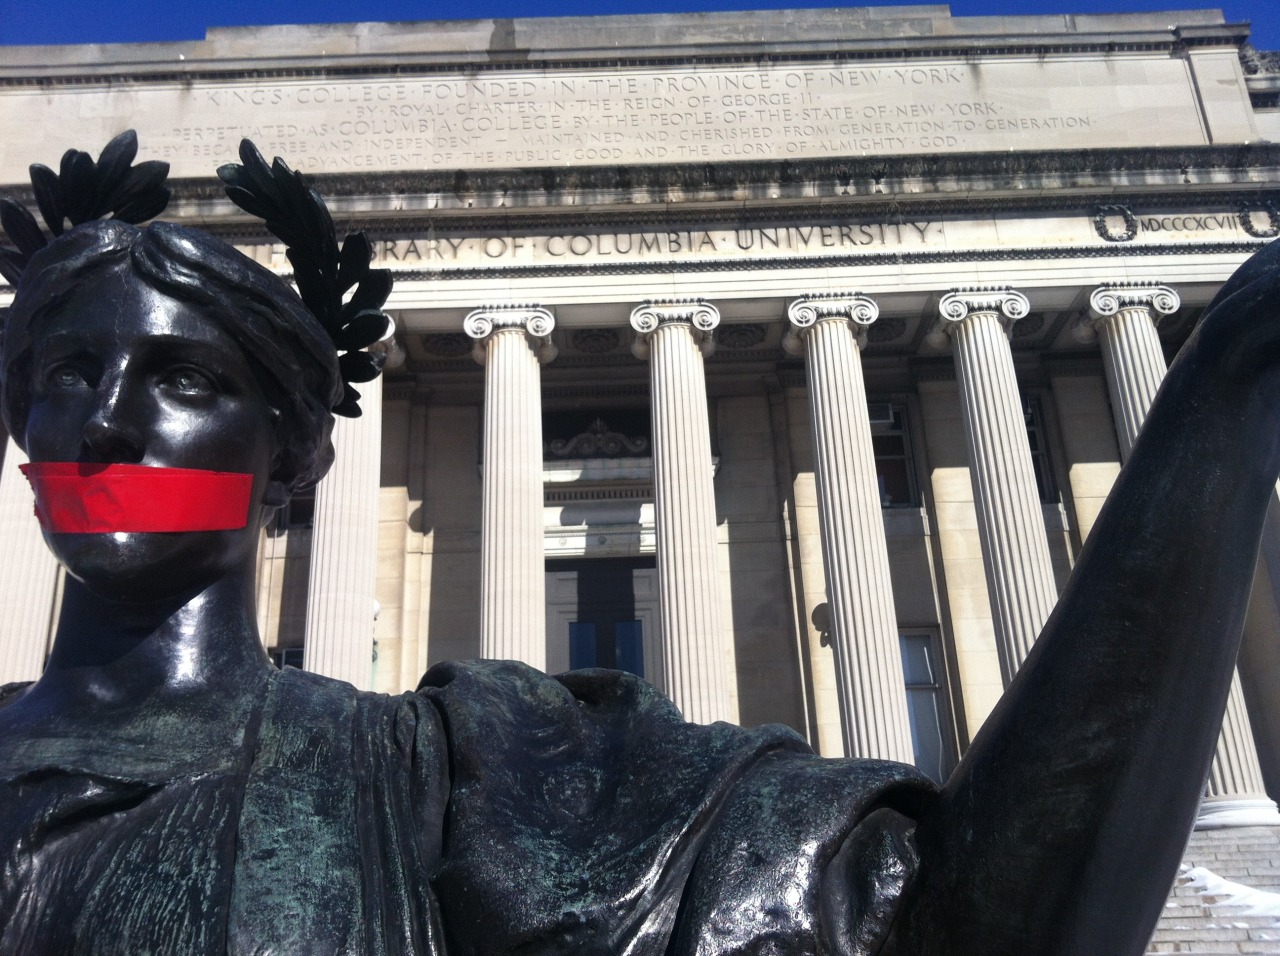 Activists use red tape to symbolize the administrative attempt to silence survivors. Picture taken at Low Library, the seat of the Columbia University administration. - Photo credit: George Joseph